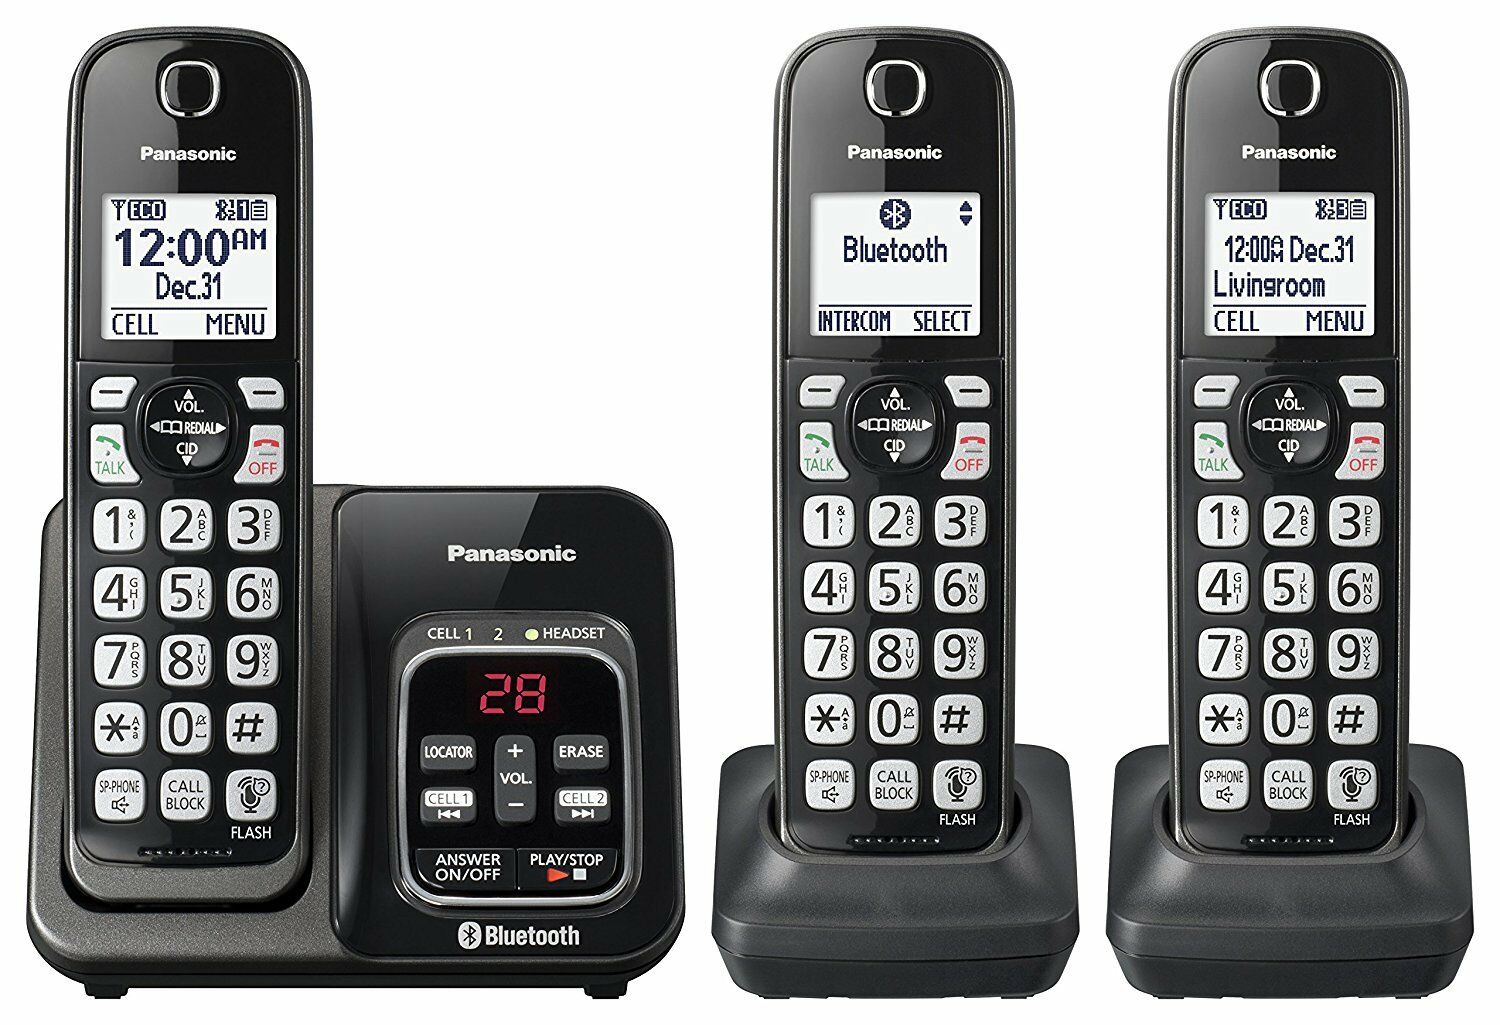 Panasonic Kx-tg833sk Bluetooth Cordless Phone With Voice Assist - 3 Handsets